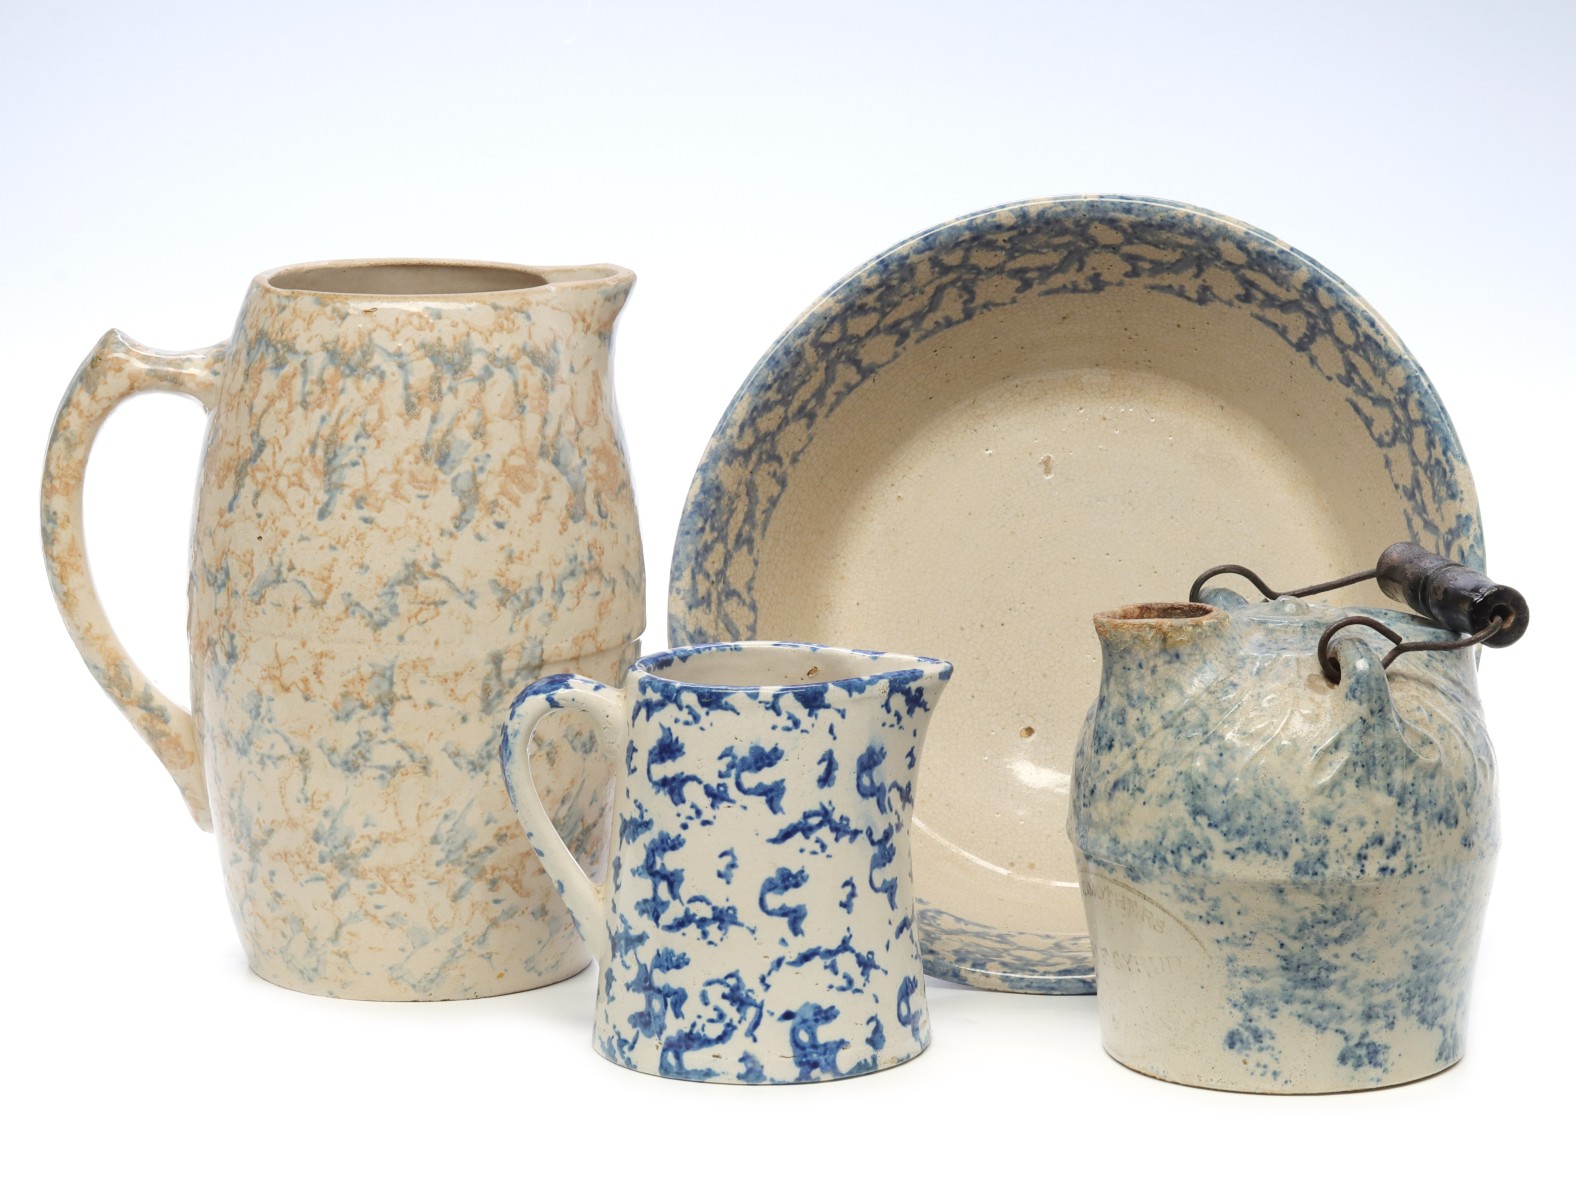 A COLLECTION OF ORANGE, BLUE AND WHITE SPONGEWARE